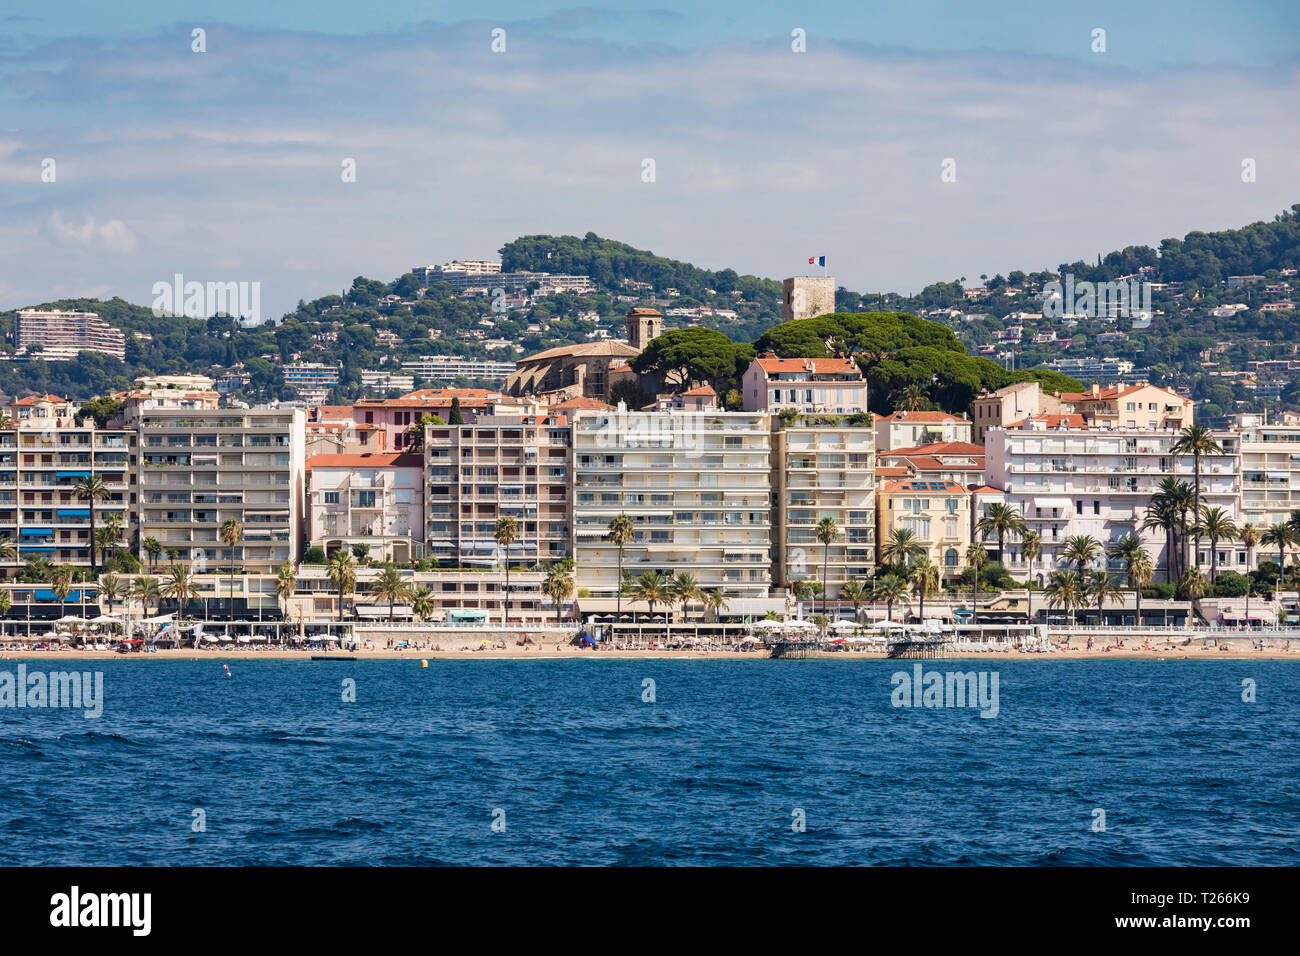 France, Provence-Alpes-Cote d'Azur, Cannes, apartment buildings at the beach, Le Suquet old town in the background Stock Photo